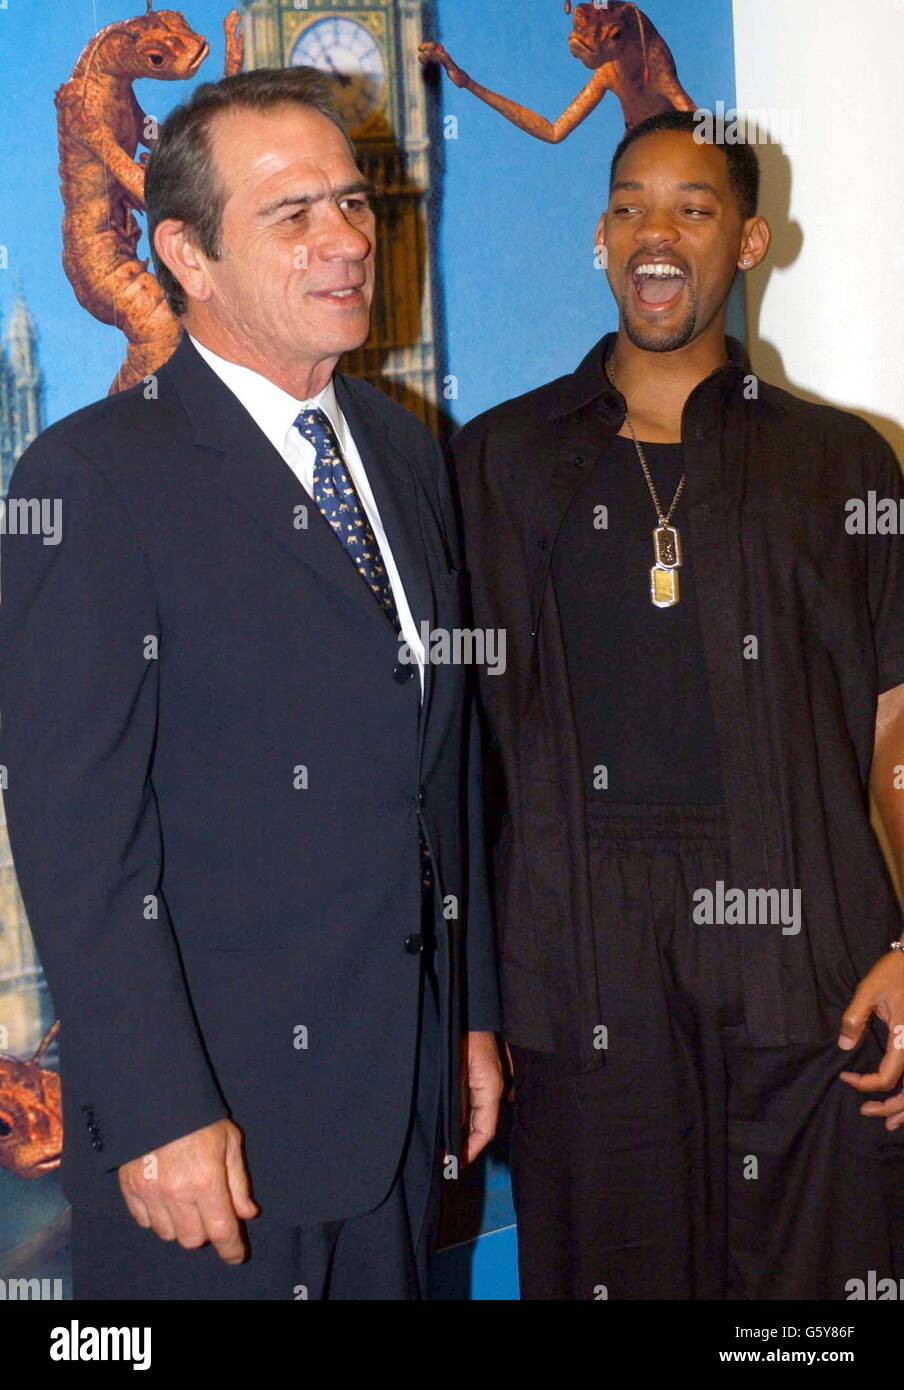 Actors Tommy Lee Jones (left) and Will Smith during a photocall at the BAFTA offices in London's Piccadilly to promote their new film 'Men In Black 2'. Stock Photo